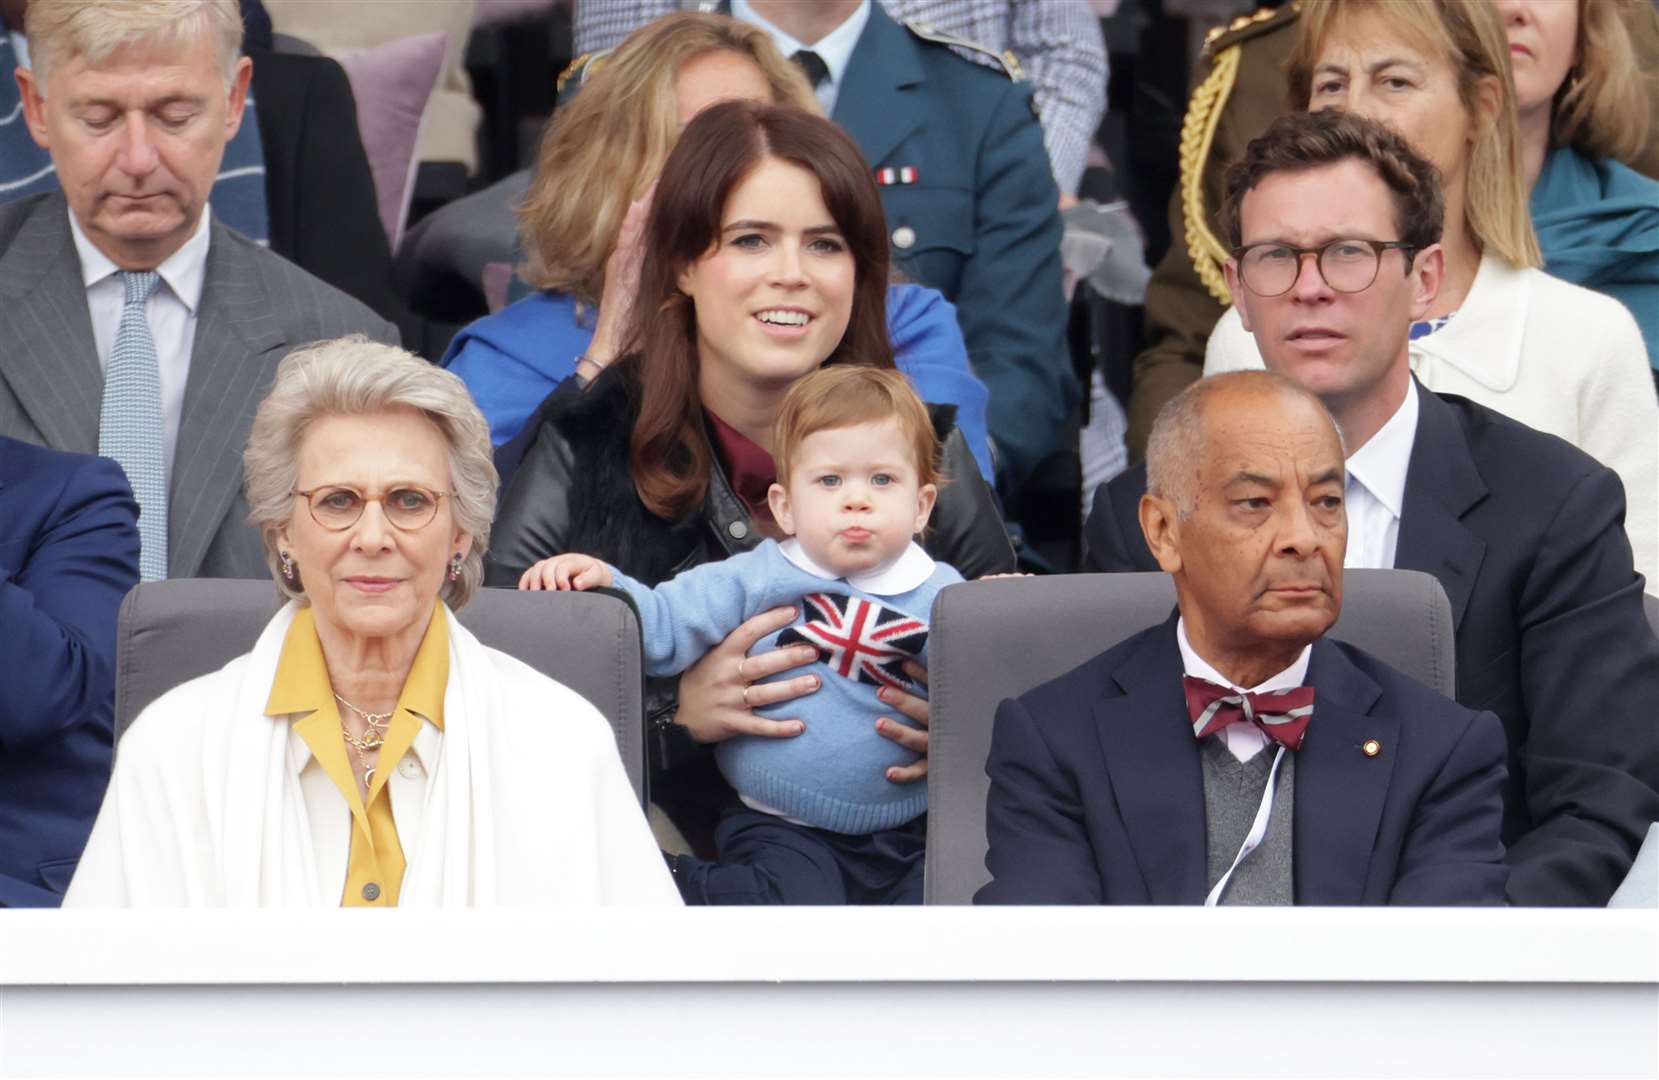 Princess Eugenie and Jack Brooksbank with their son August during the Platinum Jubilee celebrations in 2022 (Chris Jackson/PA)